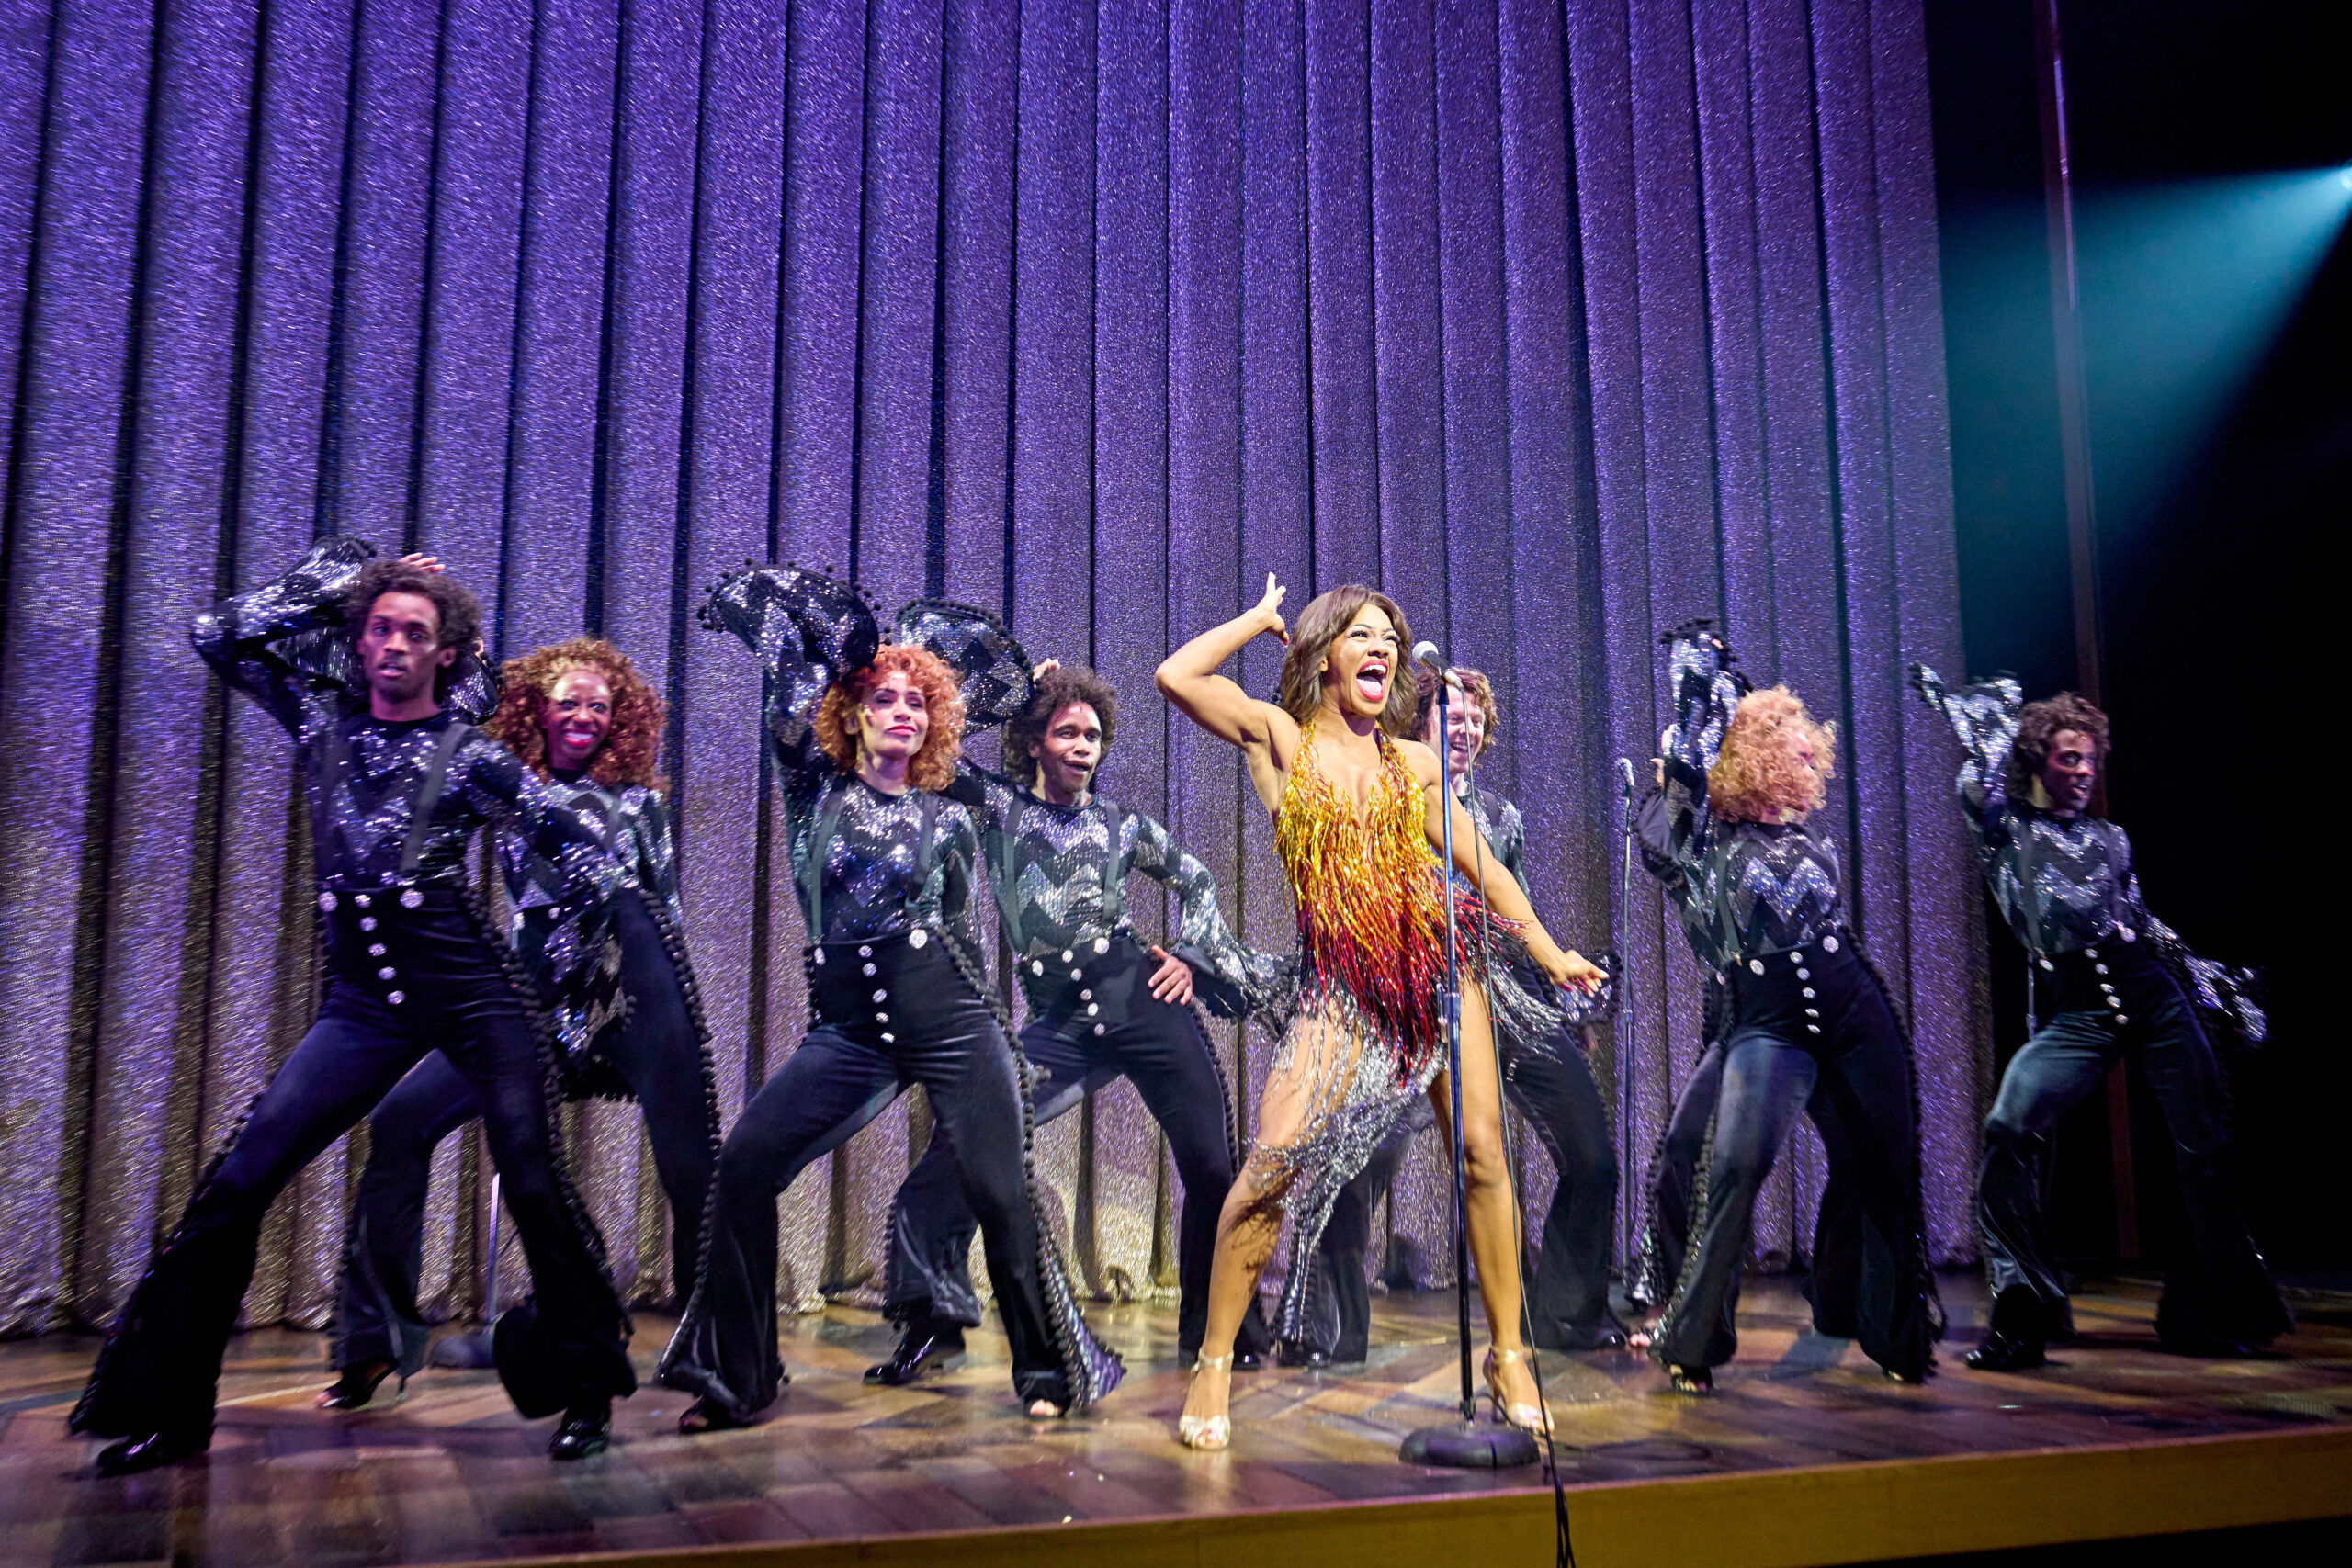 Tina - The Tina Turner Musical is coming to Manchester's Palace Theatre. Credit: Manuel Harlan